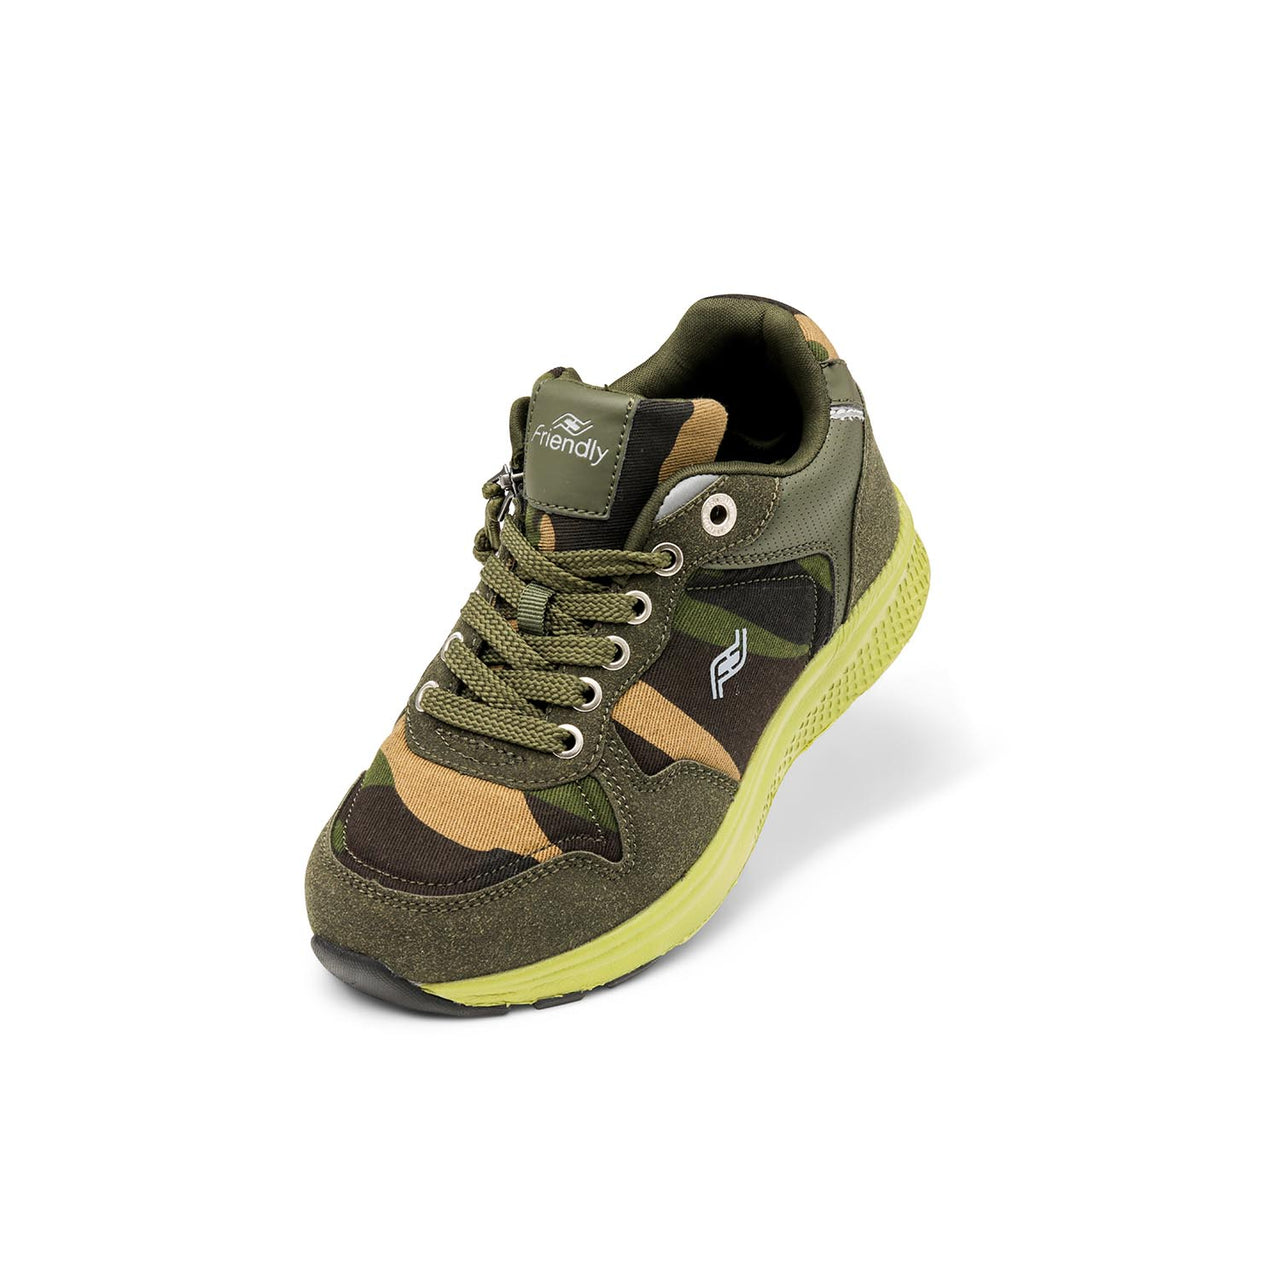 Friendly Shoes Excursion Mid Woodland Camo